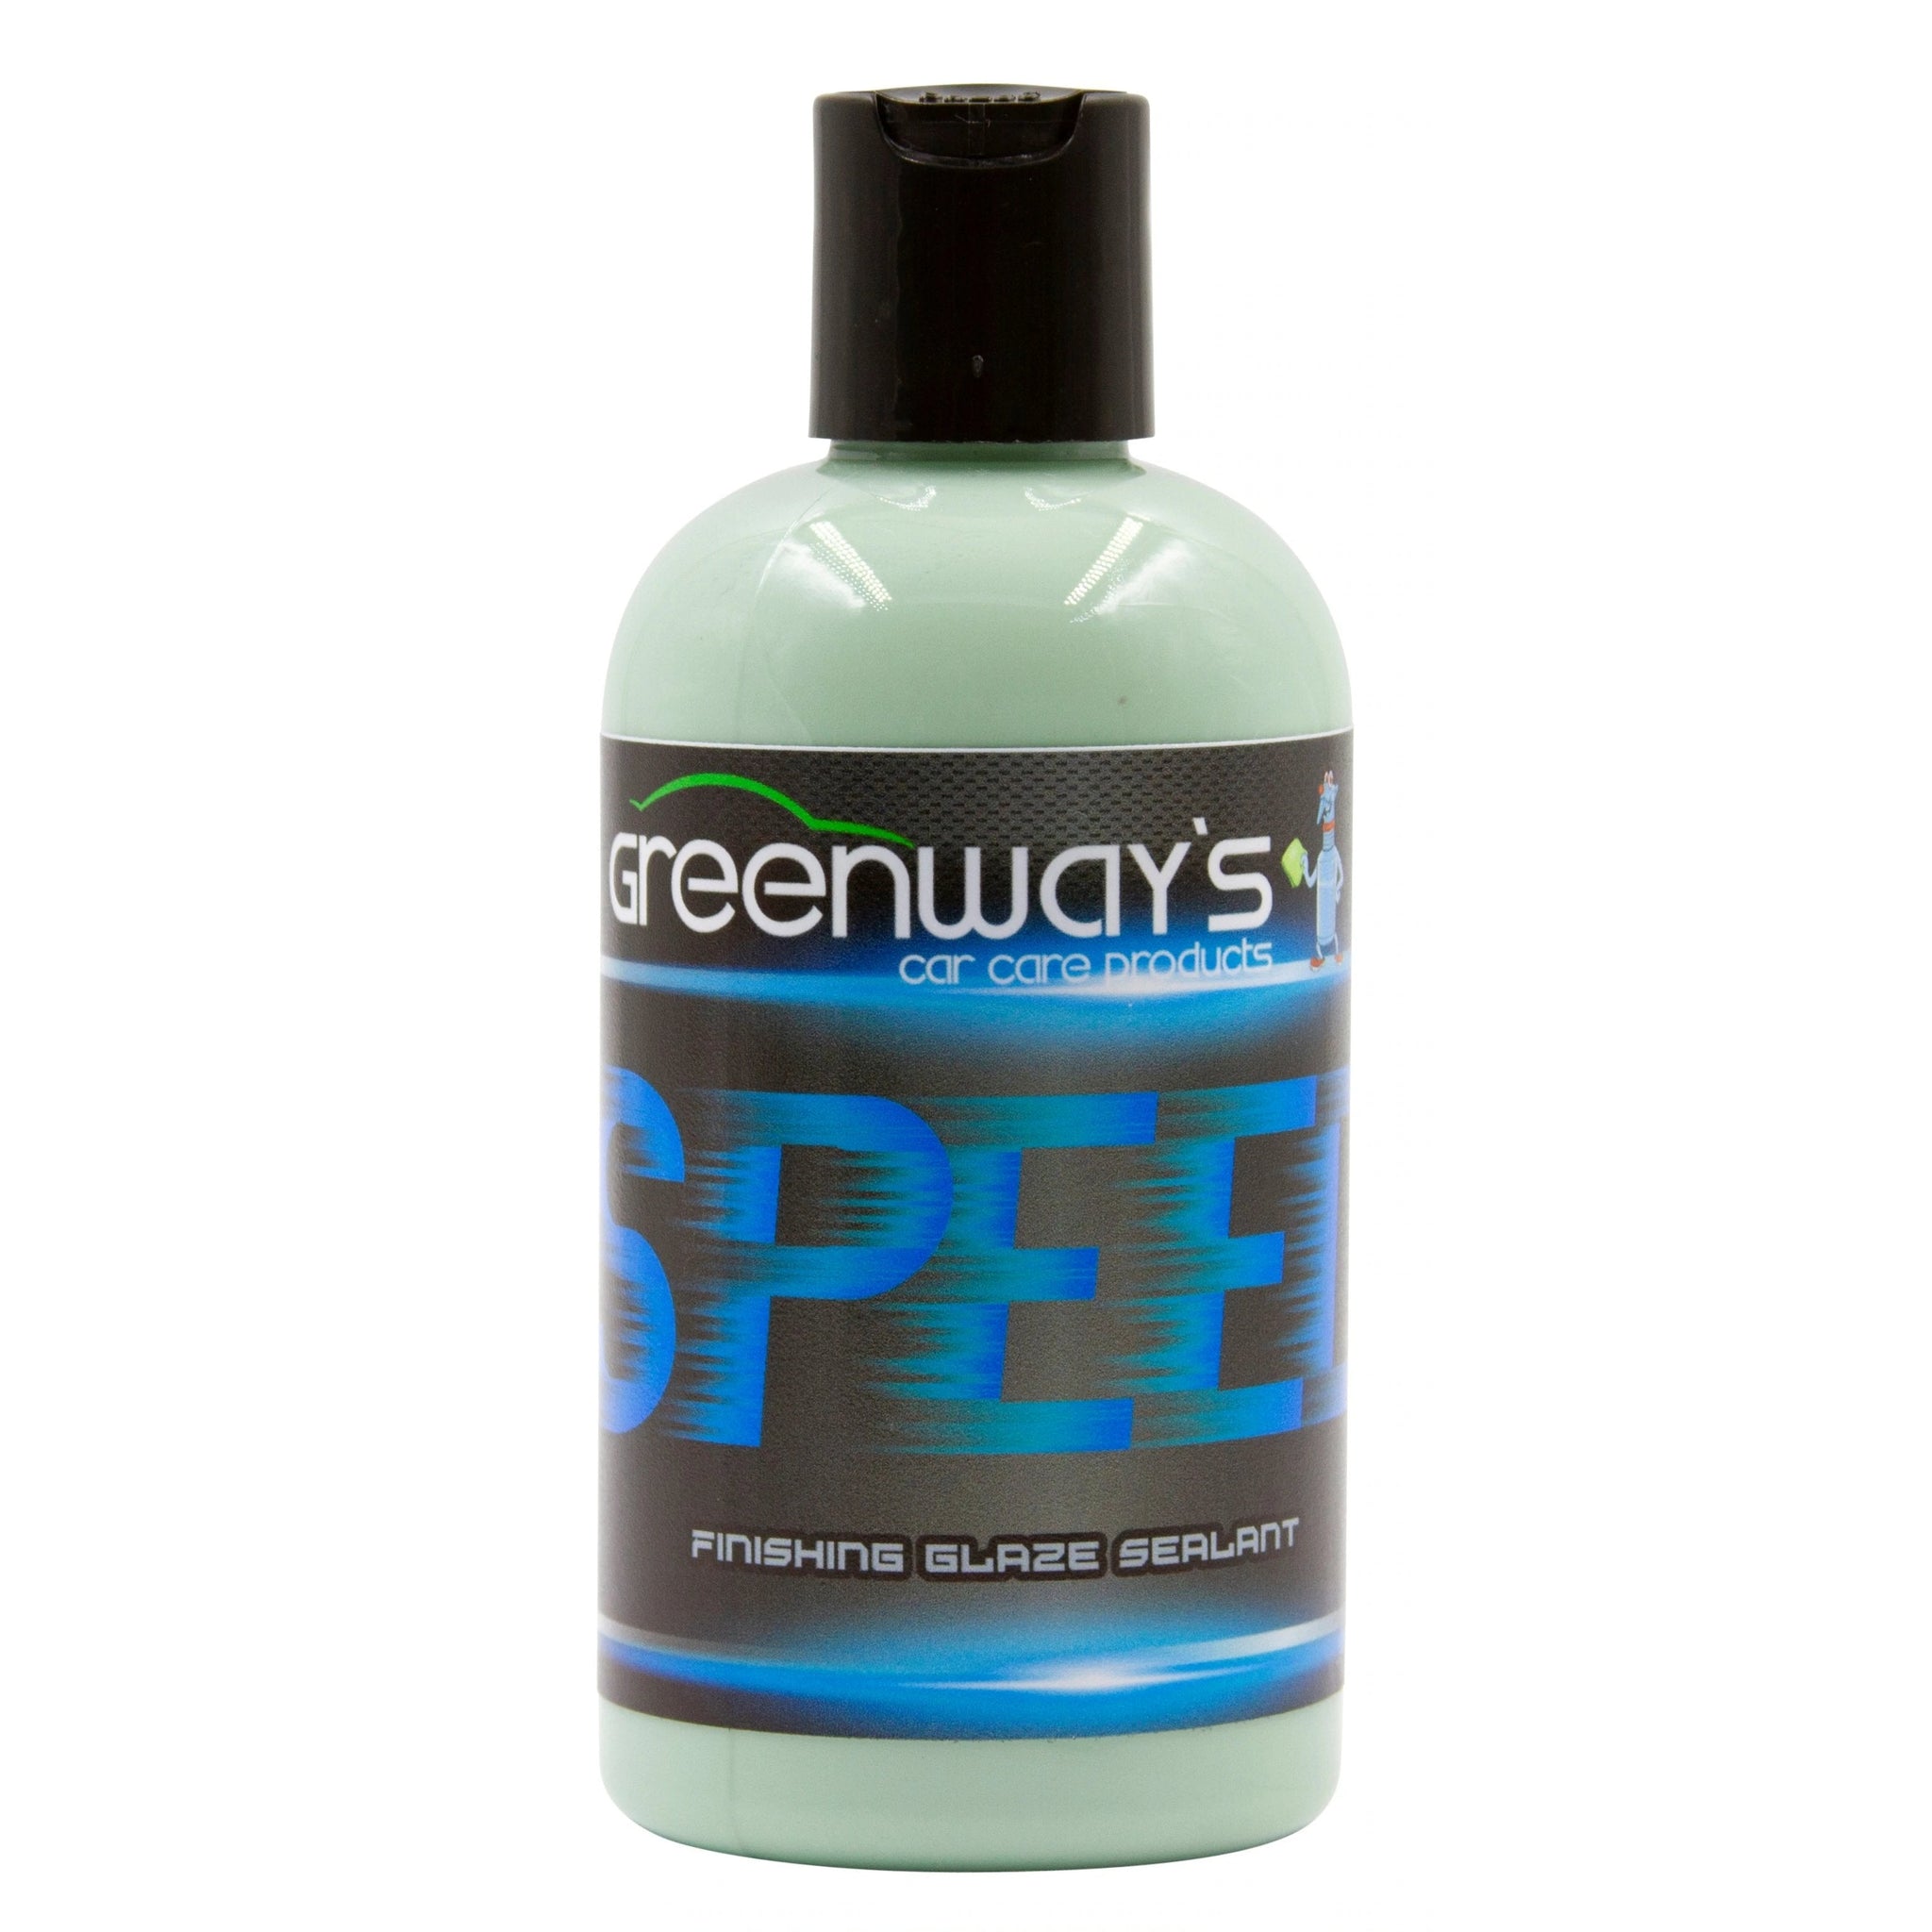 Greenway’s Speed, creamy wax-free, correction and protection finishing glaze sealant for sensitive paintwork, 8 ounces.